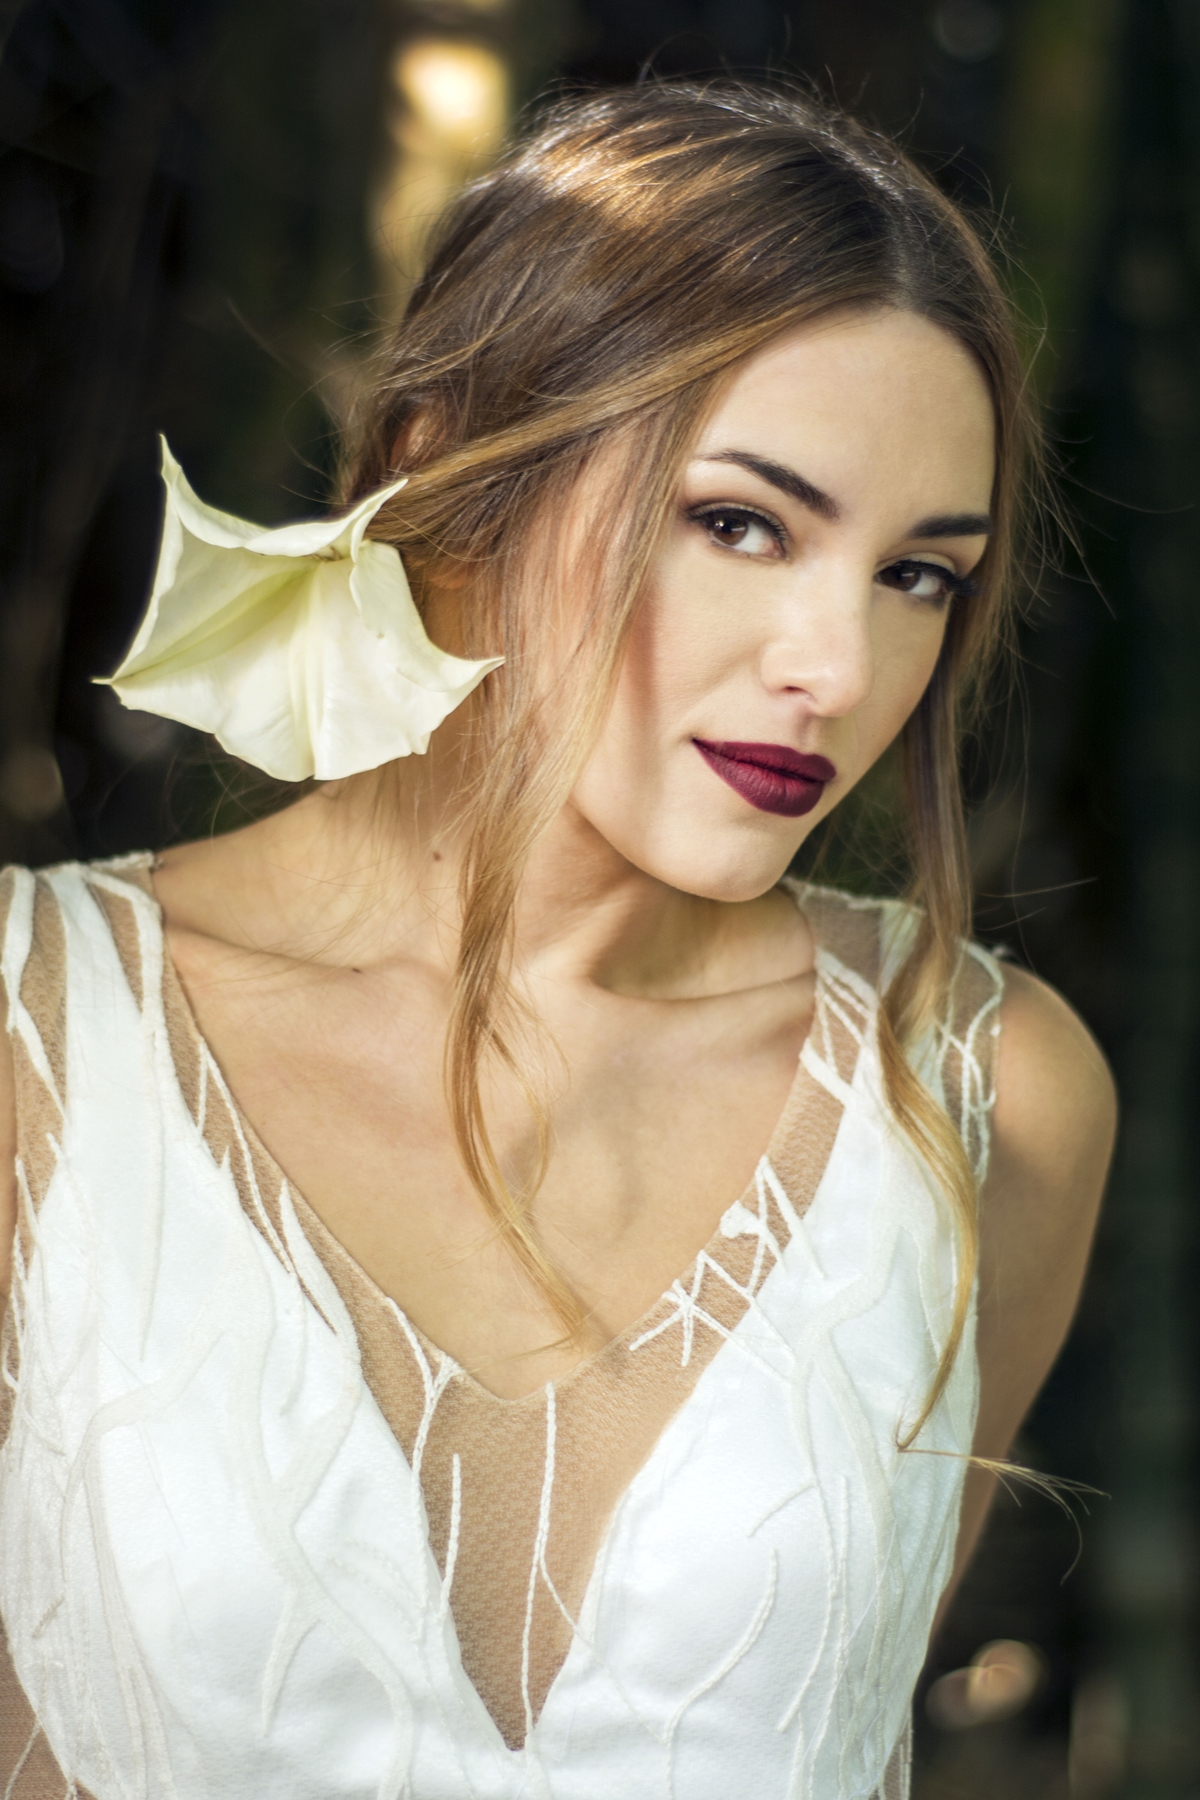 Bridal fashion shoot with Lewaa Haute Couture wedding dresses